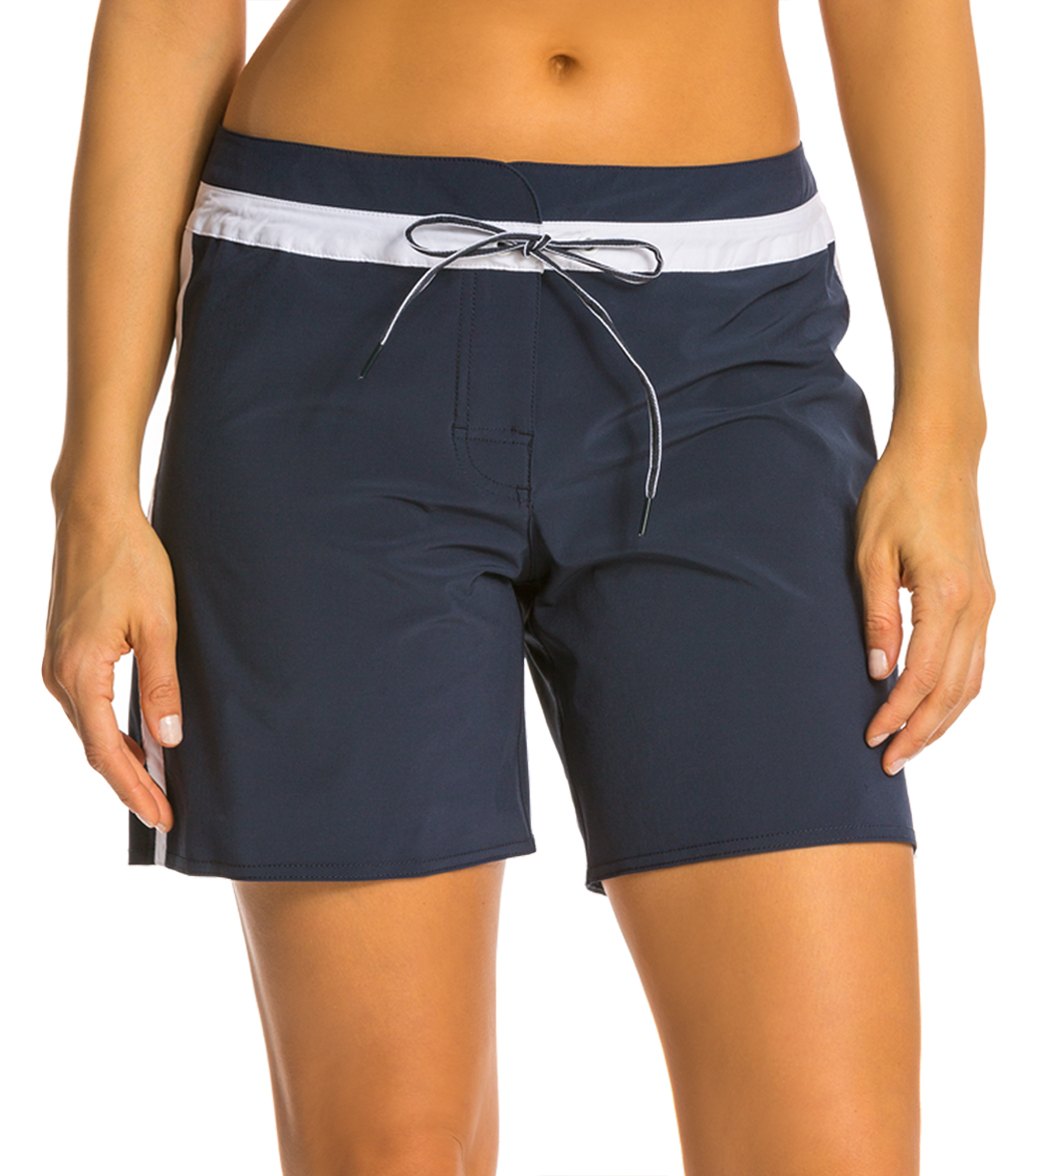 Seafolly Women's Block Party Mid Length Boardshort at SwimOutlet.com ...